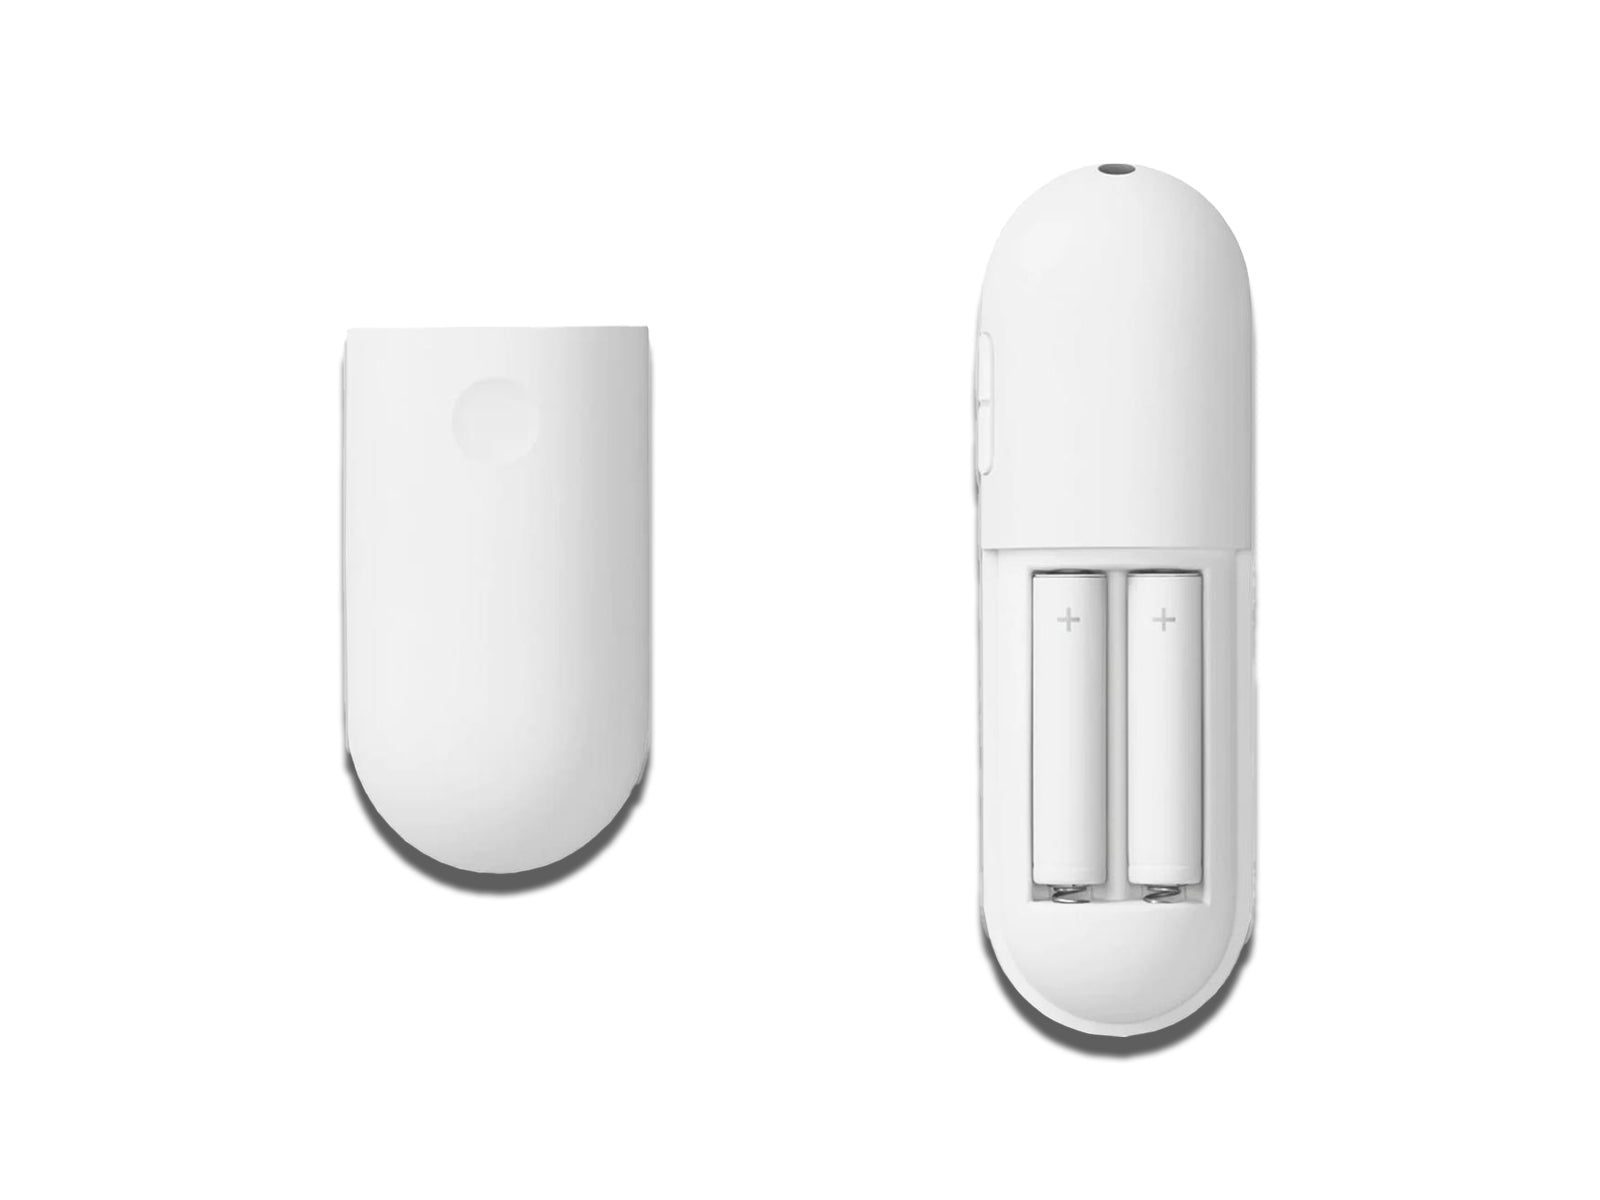 Image of The Remote With Open Battery Tray on The White Background